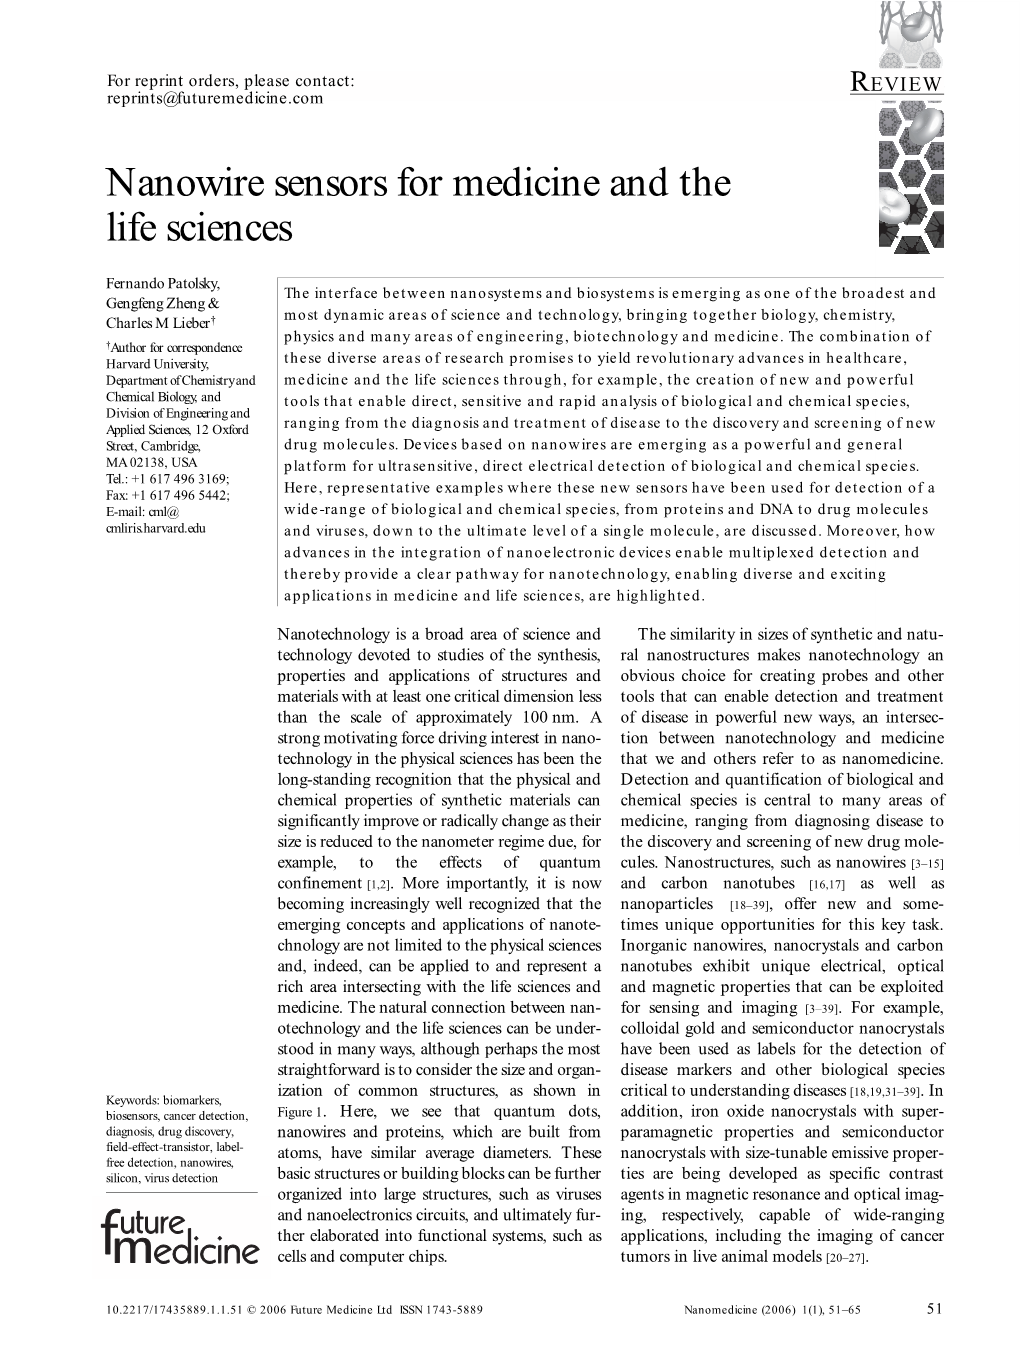 Nanowire Sensors for Medicine and the Life Sciences